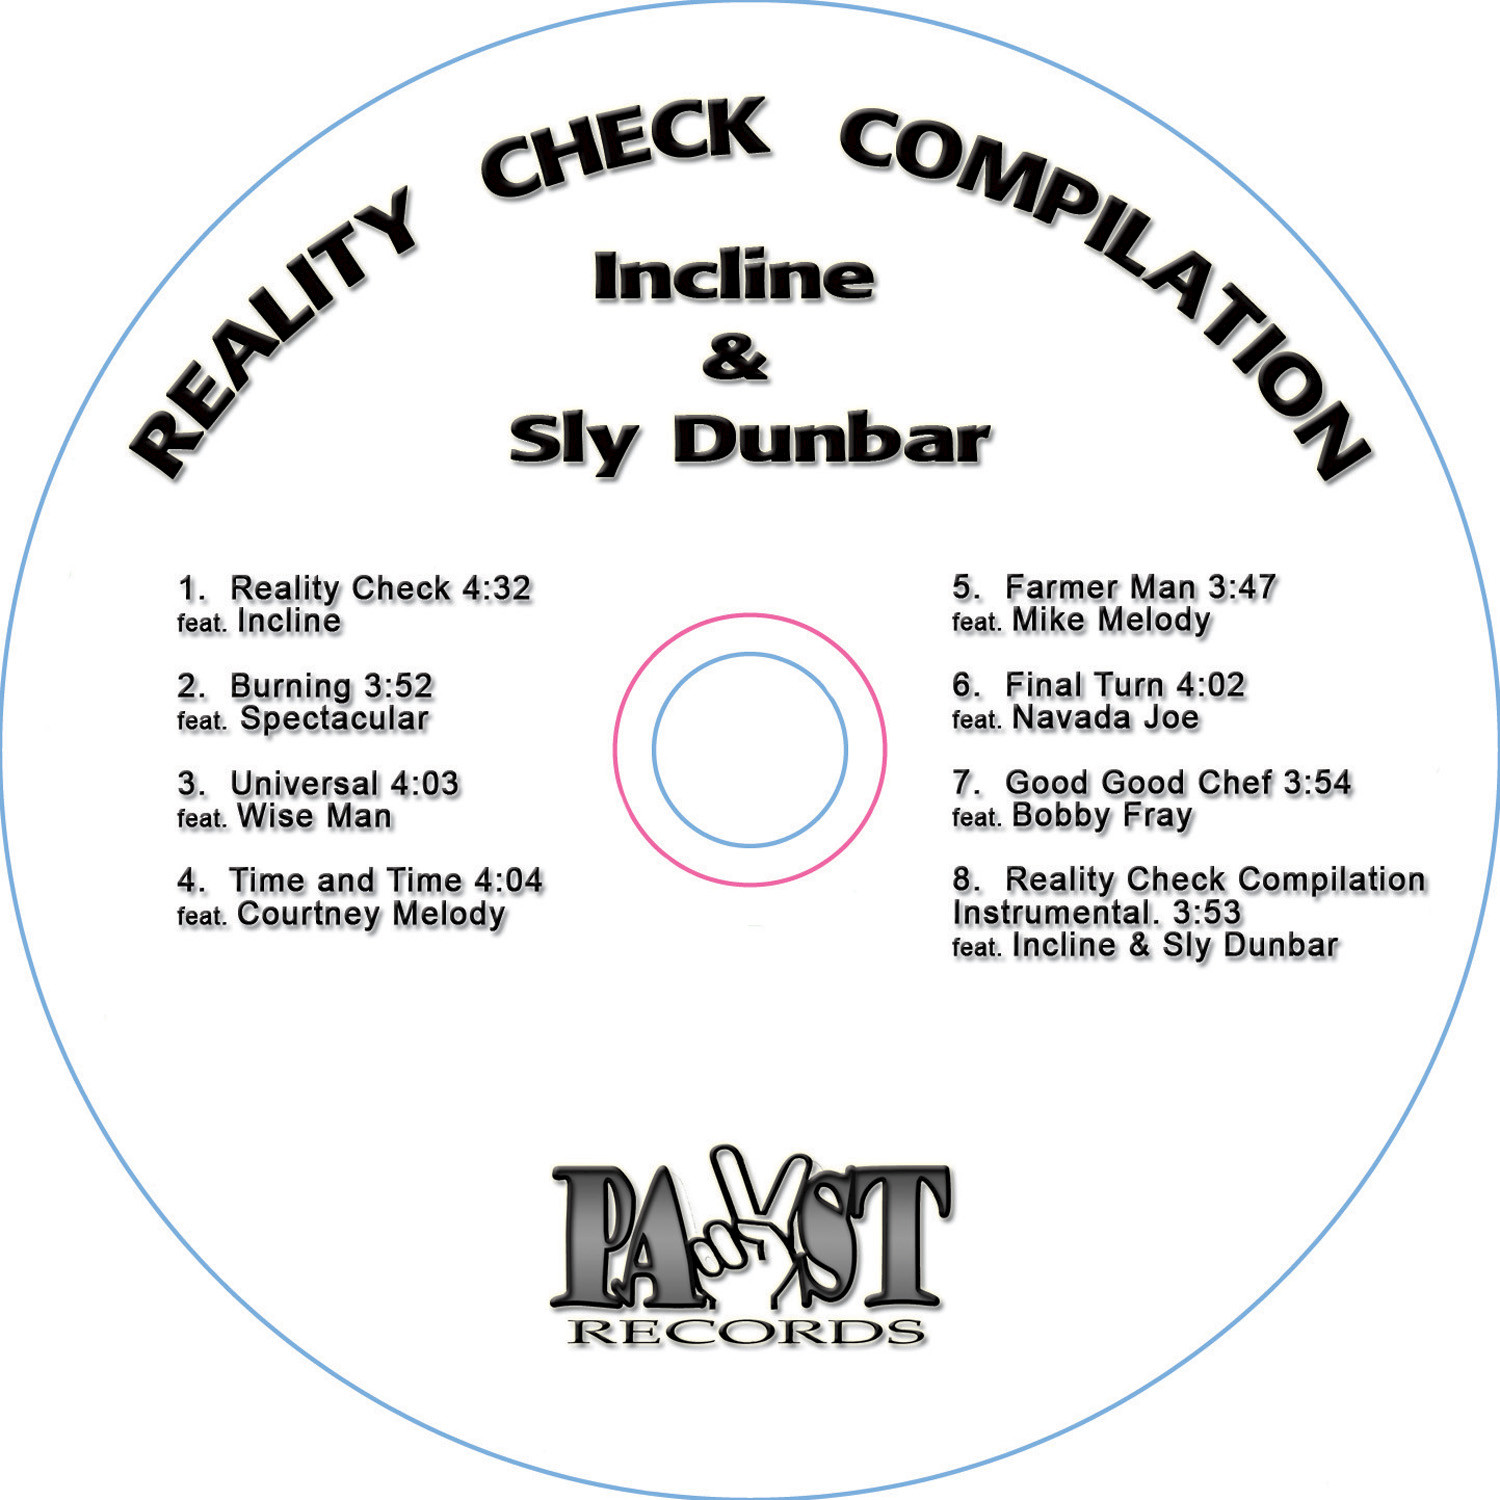 Reality Check Compilation Instrumental